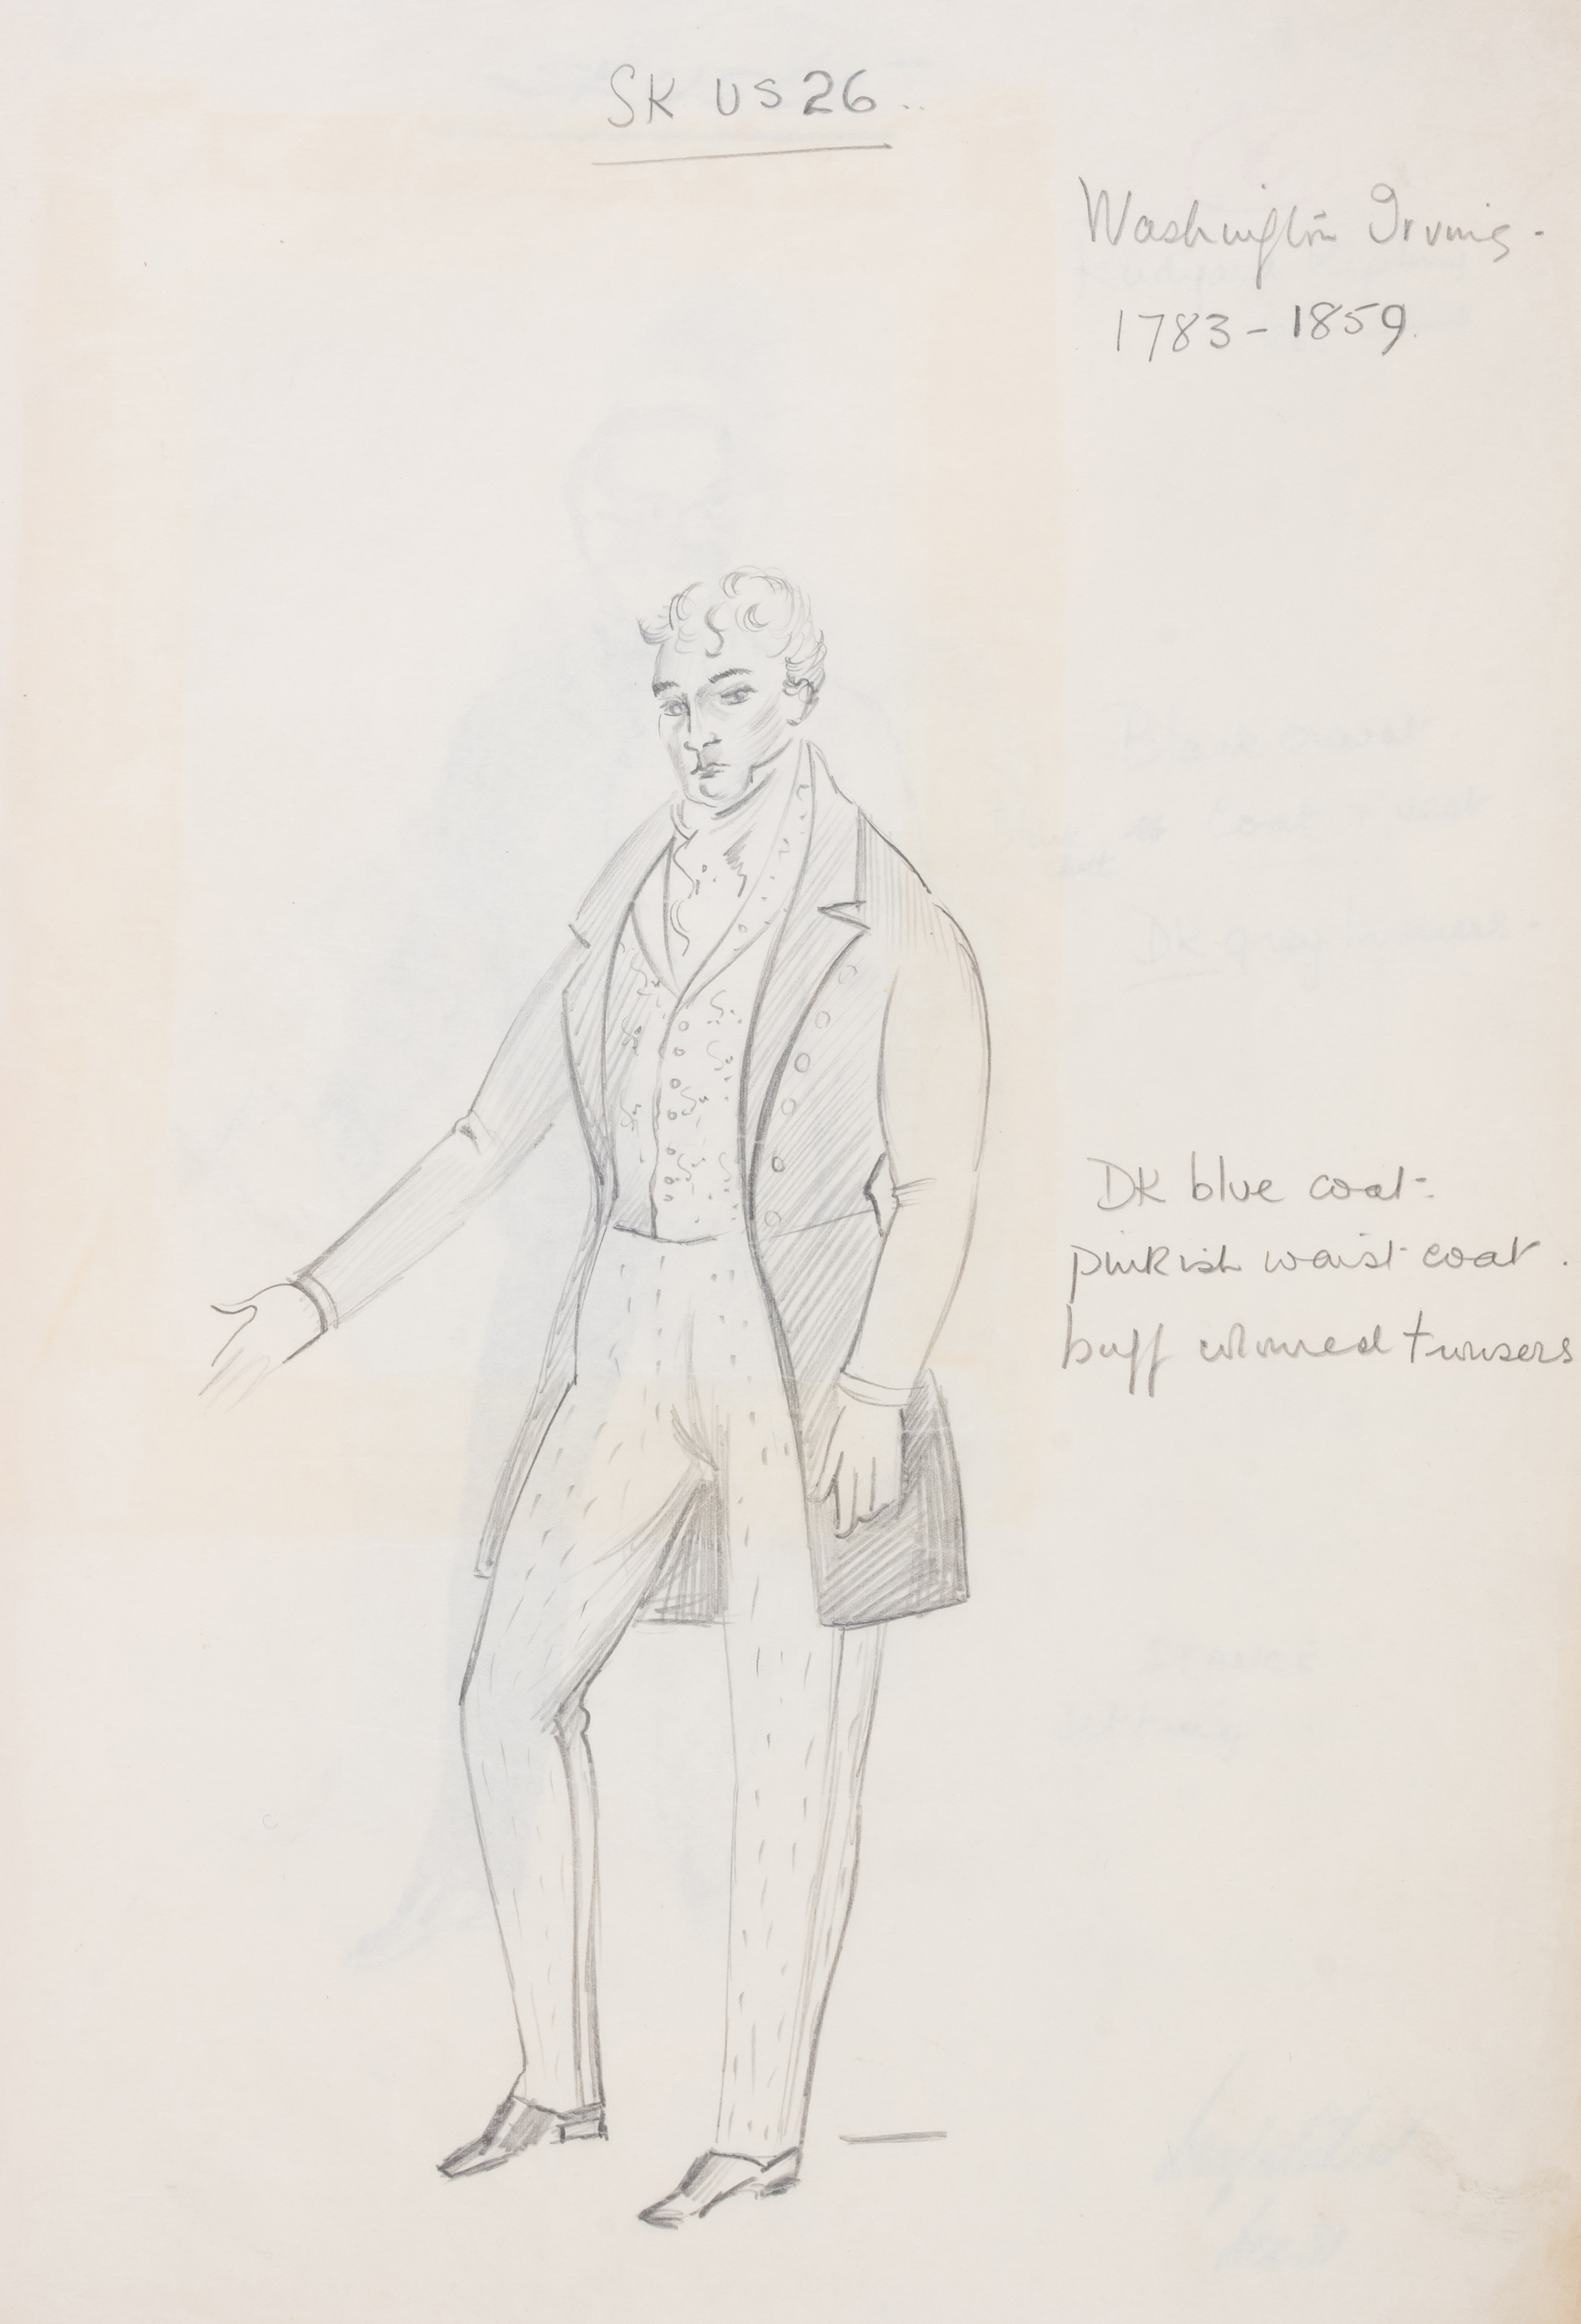 B.J. Simmons & Co. (Theatrical Court Costumers) Collection of over 100 original theatrical costum... - Image 3 of 3